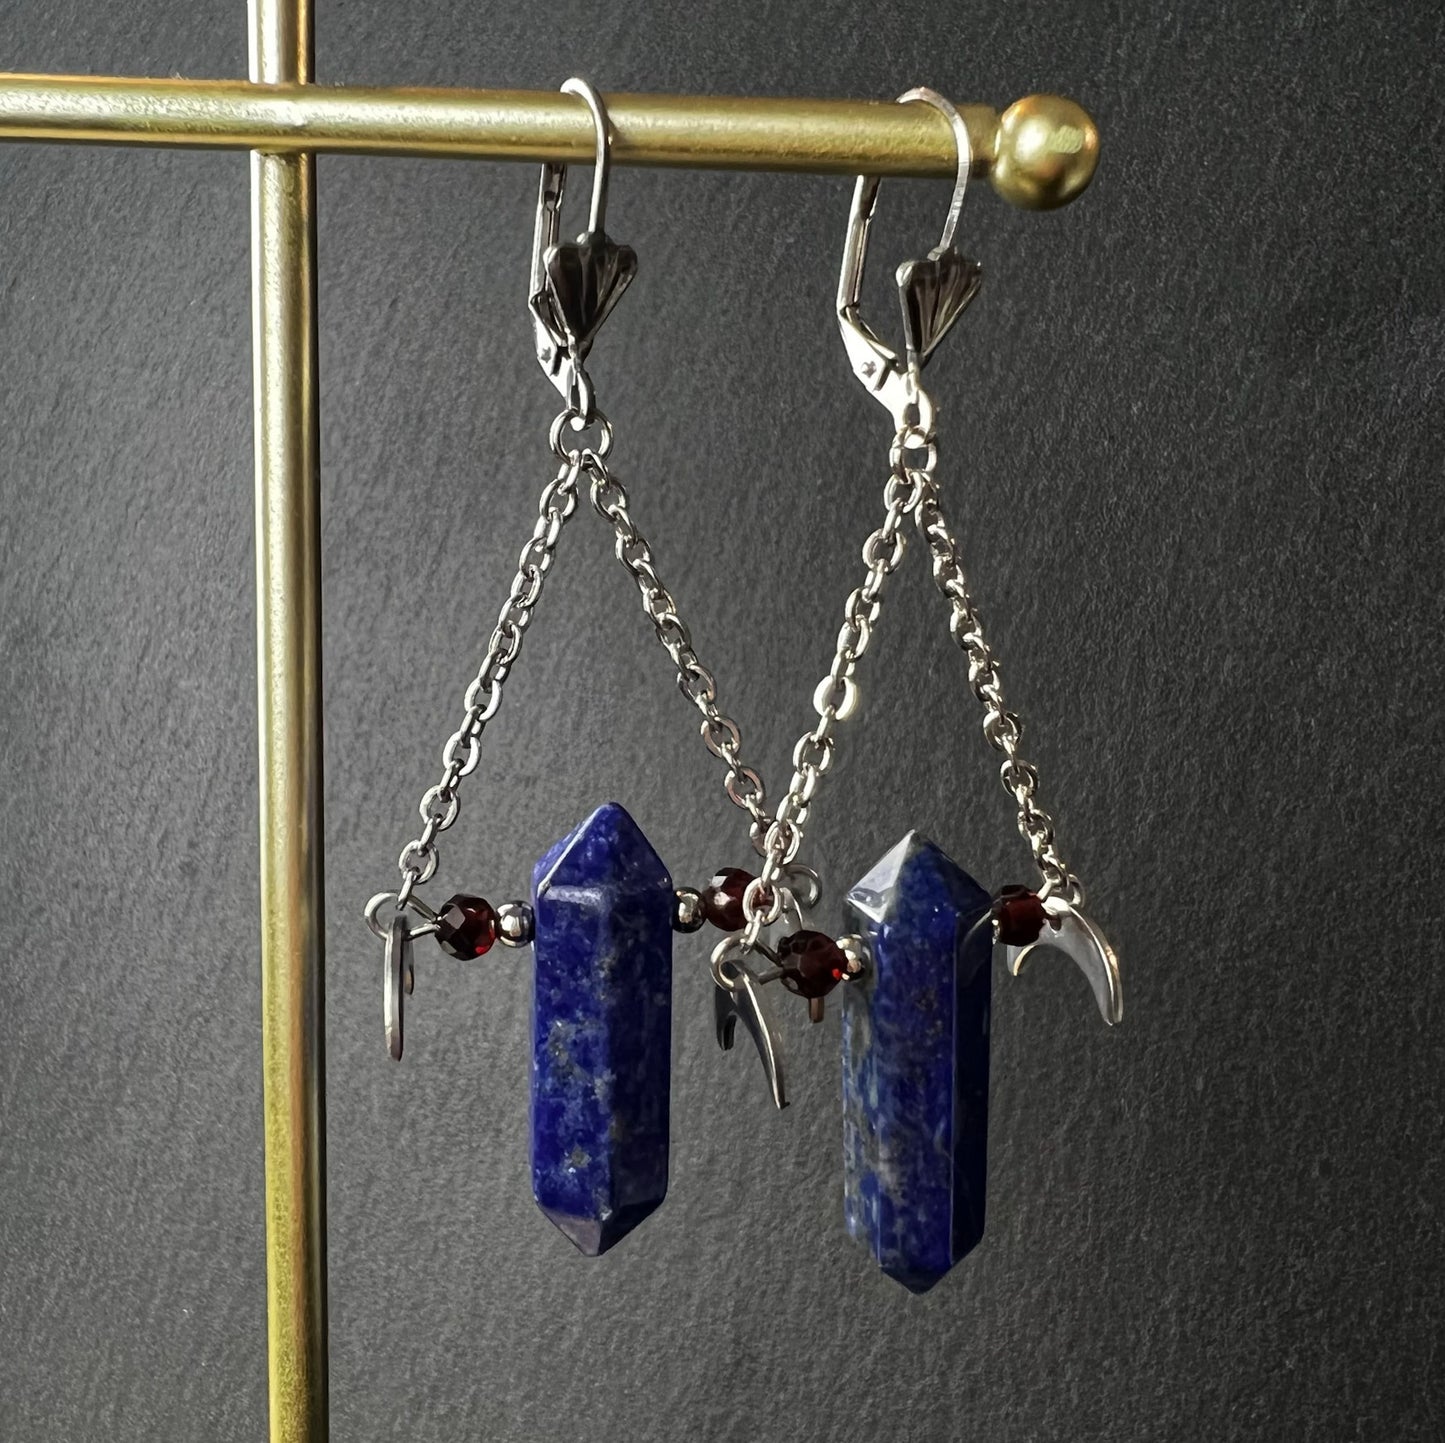 Lapis lazuli garnet and stainless steel gemstone earrings with Moon crescent